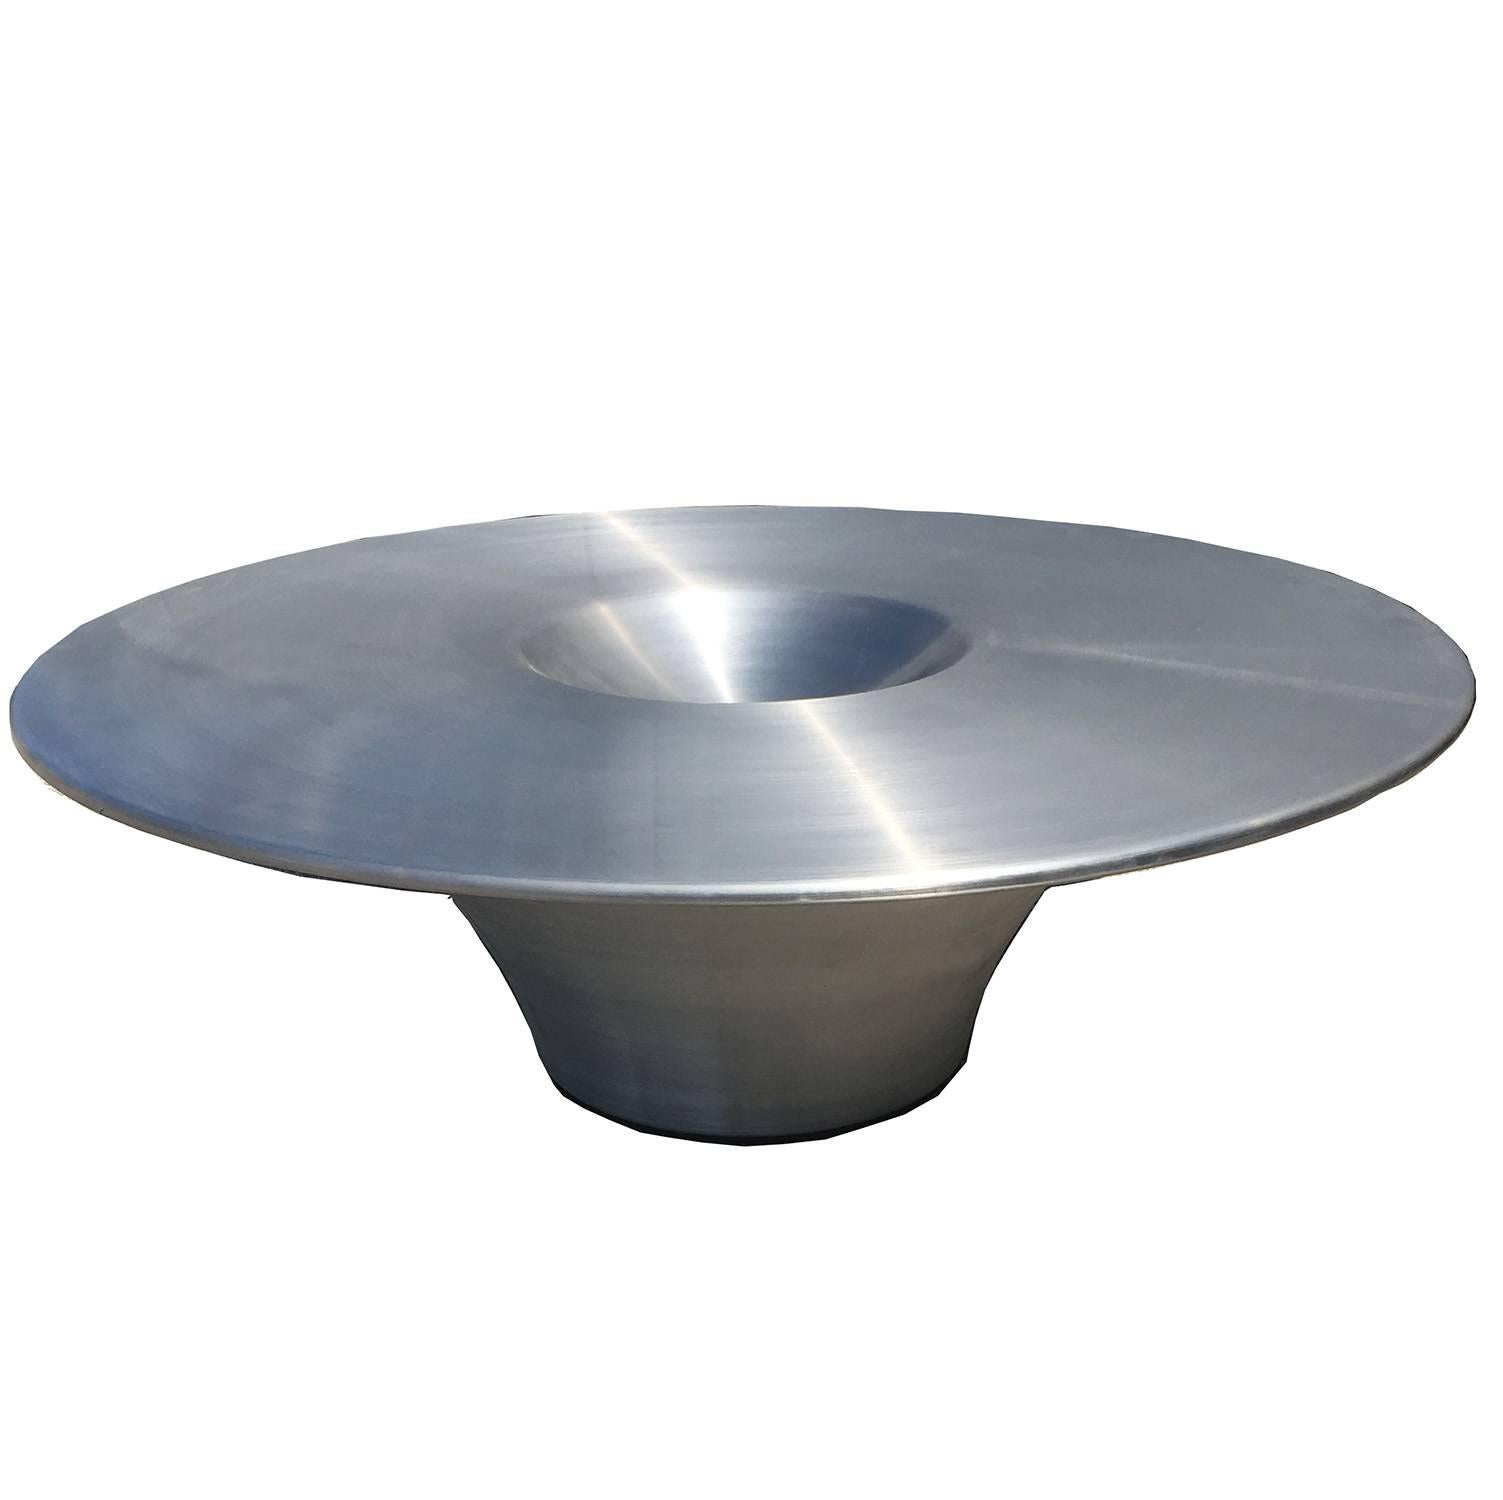 "Alien" Brushed Metal Coffee Table by Yasuhiro Shito for Cattelan Italia